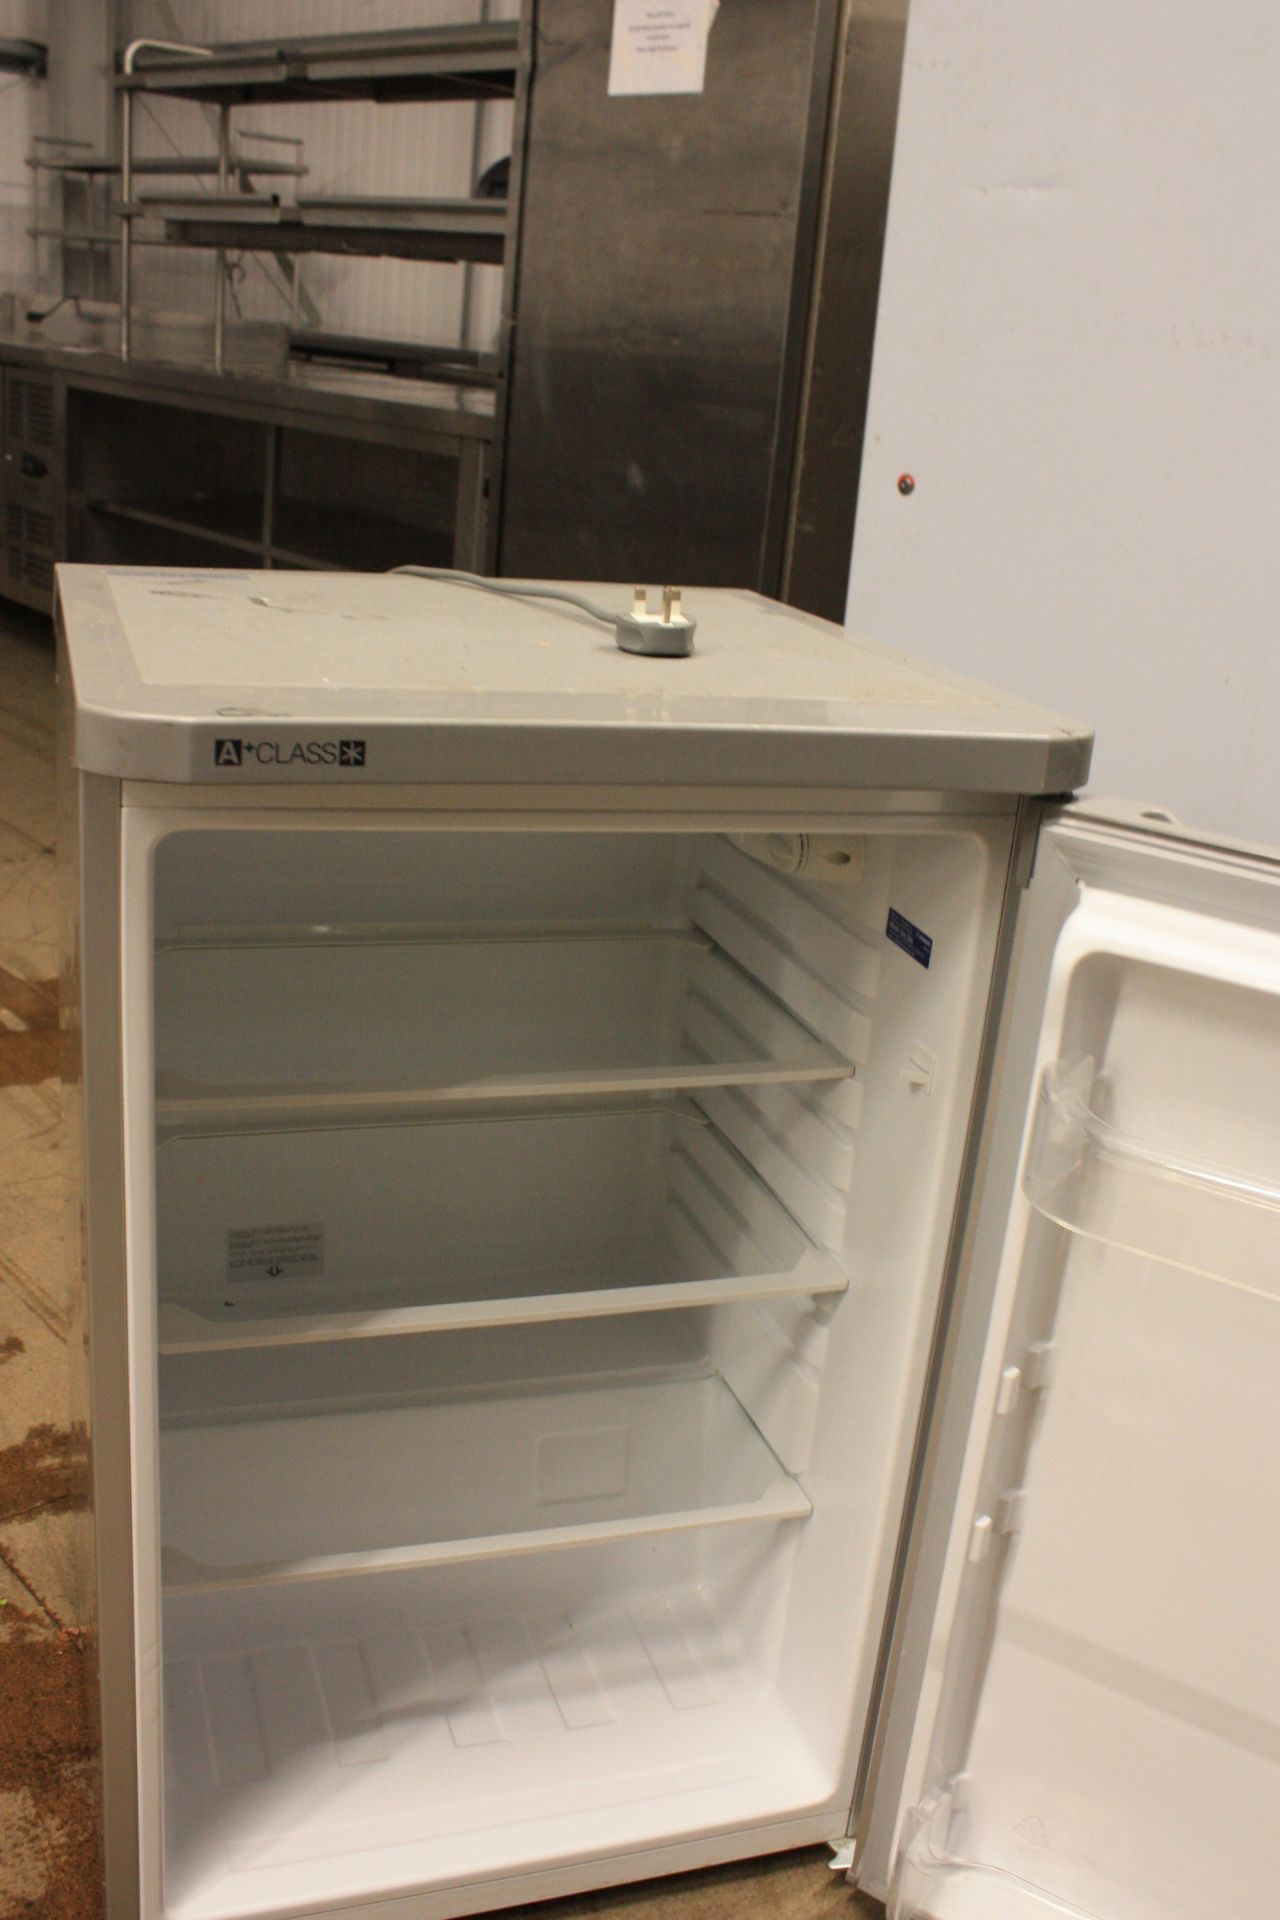 Inast silver undercounter refrigerator. Width 470mm x depth 500mm x height 840mm - Image 2 of 2